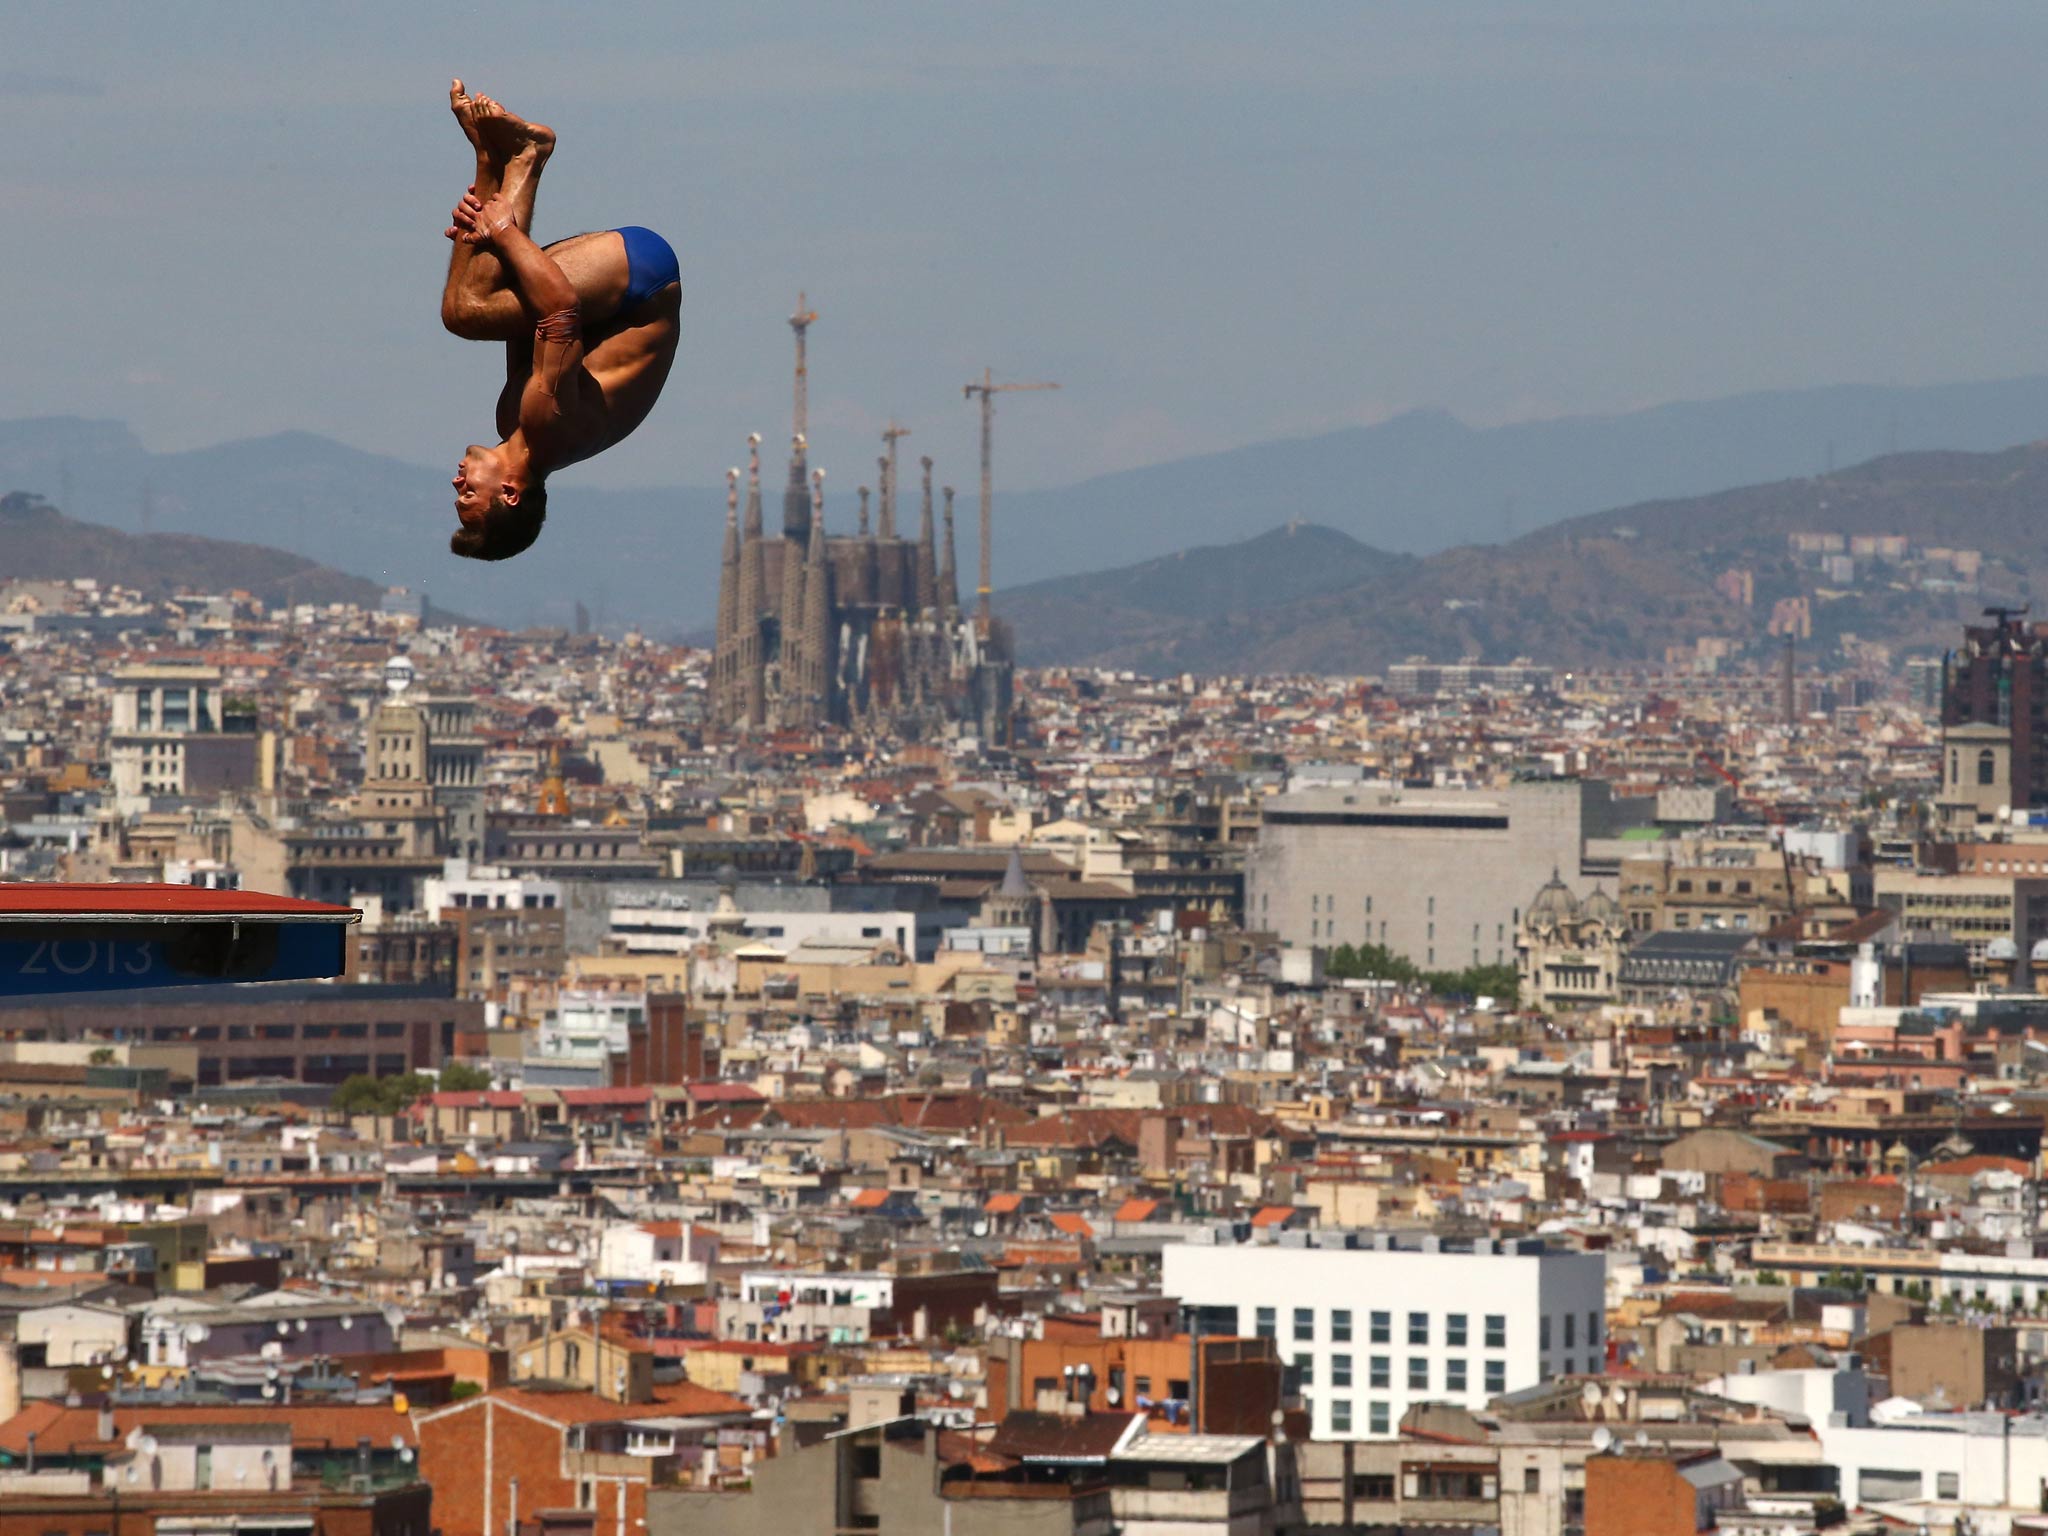 Tom Daley of Great Britain competes during the Men's 10m Platform Diving final